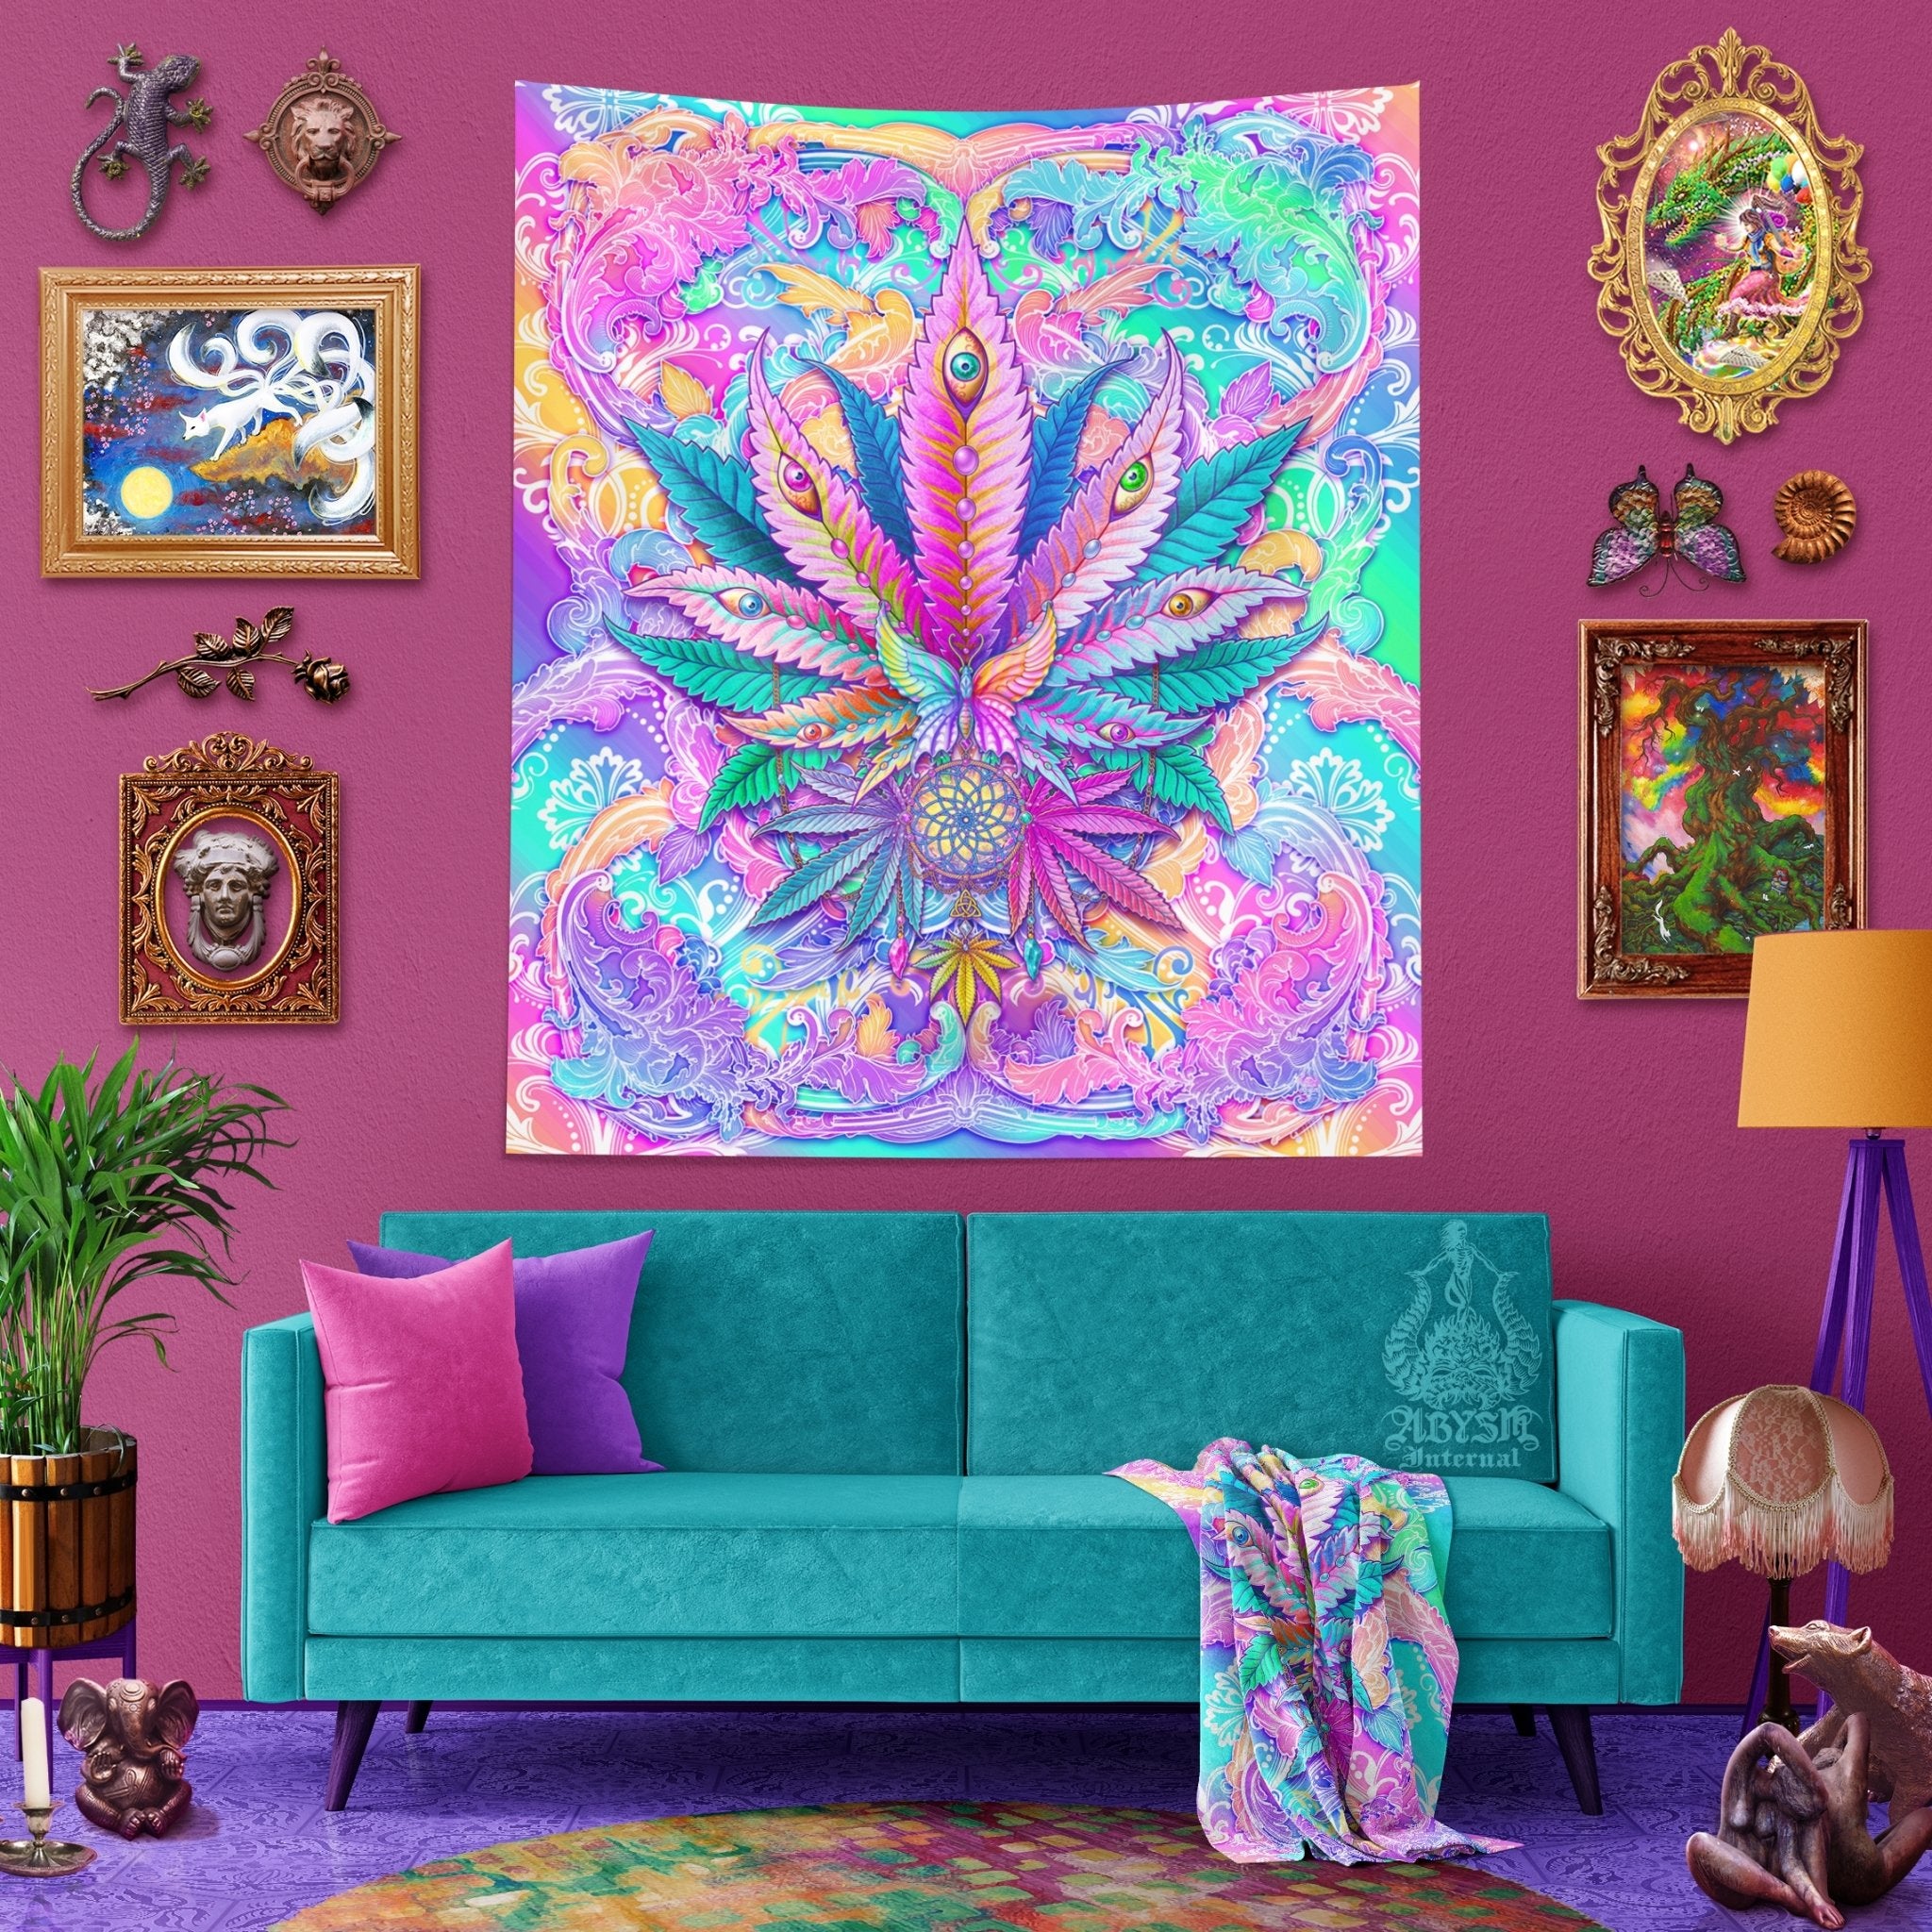 Pastel Weed Tapestry, Cannabis Shop Decor, Marijuana Wall Hanging, Pink Home Decor, Aesthetic Art Print, 420 Gift, Eclectic and Funky - Abysm Internal